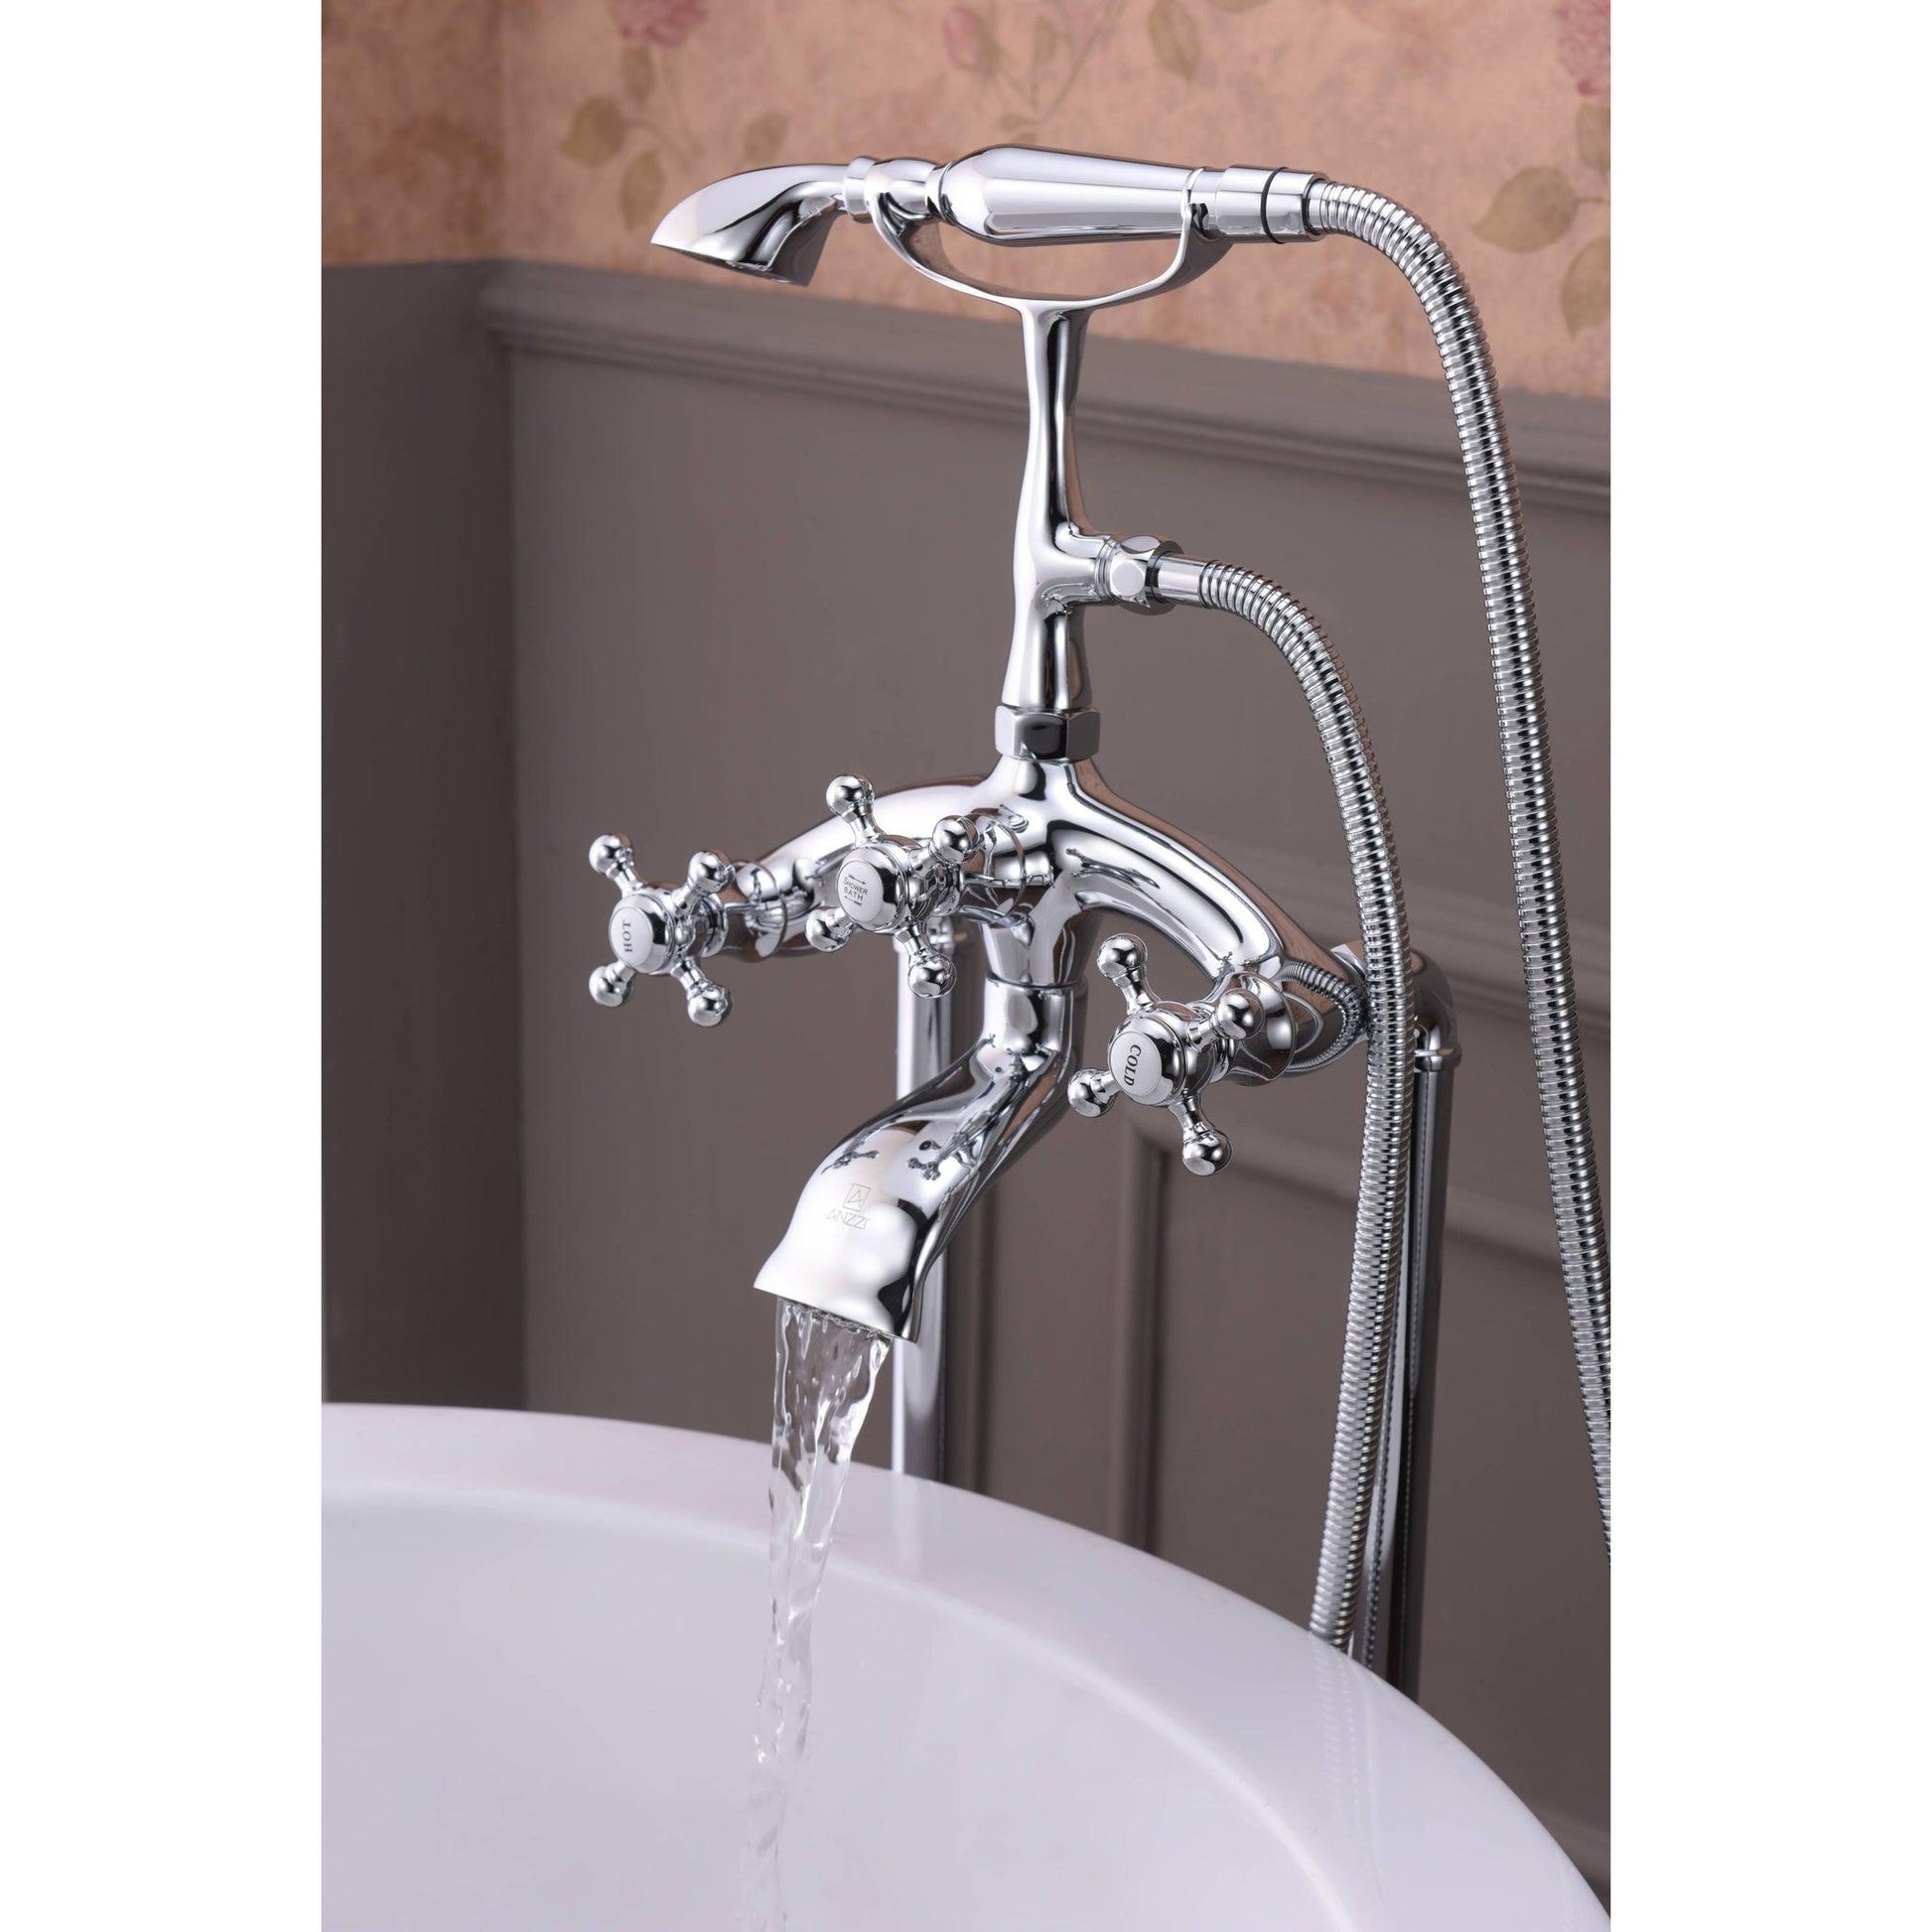 ANZZI Tugela Series 3-Handle Polished Chrome Clawfoot Tub Faucet With Euro-Grip Handheld Sprayer